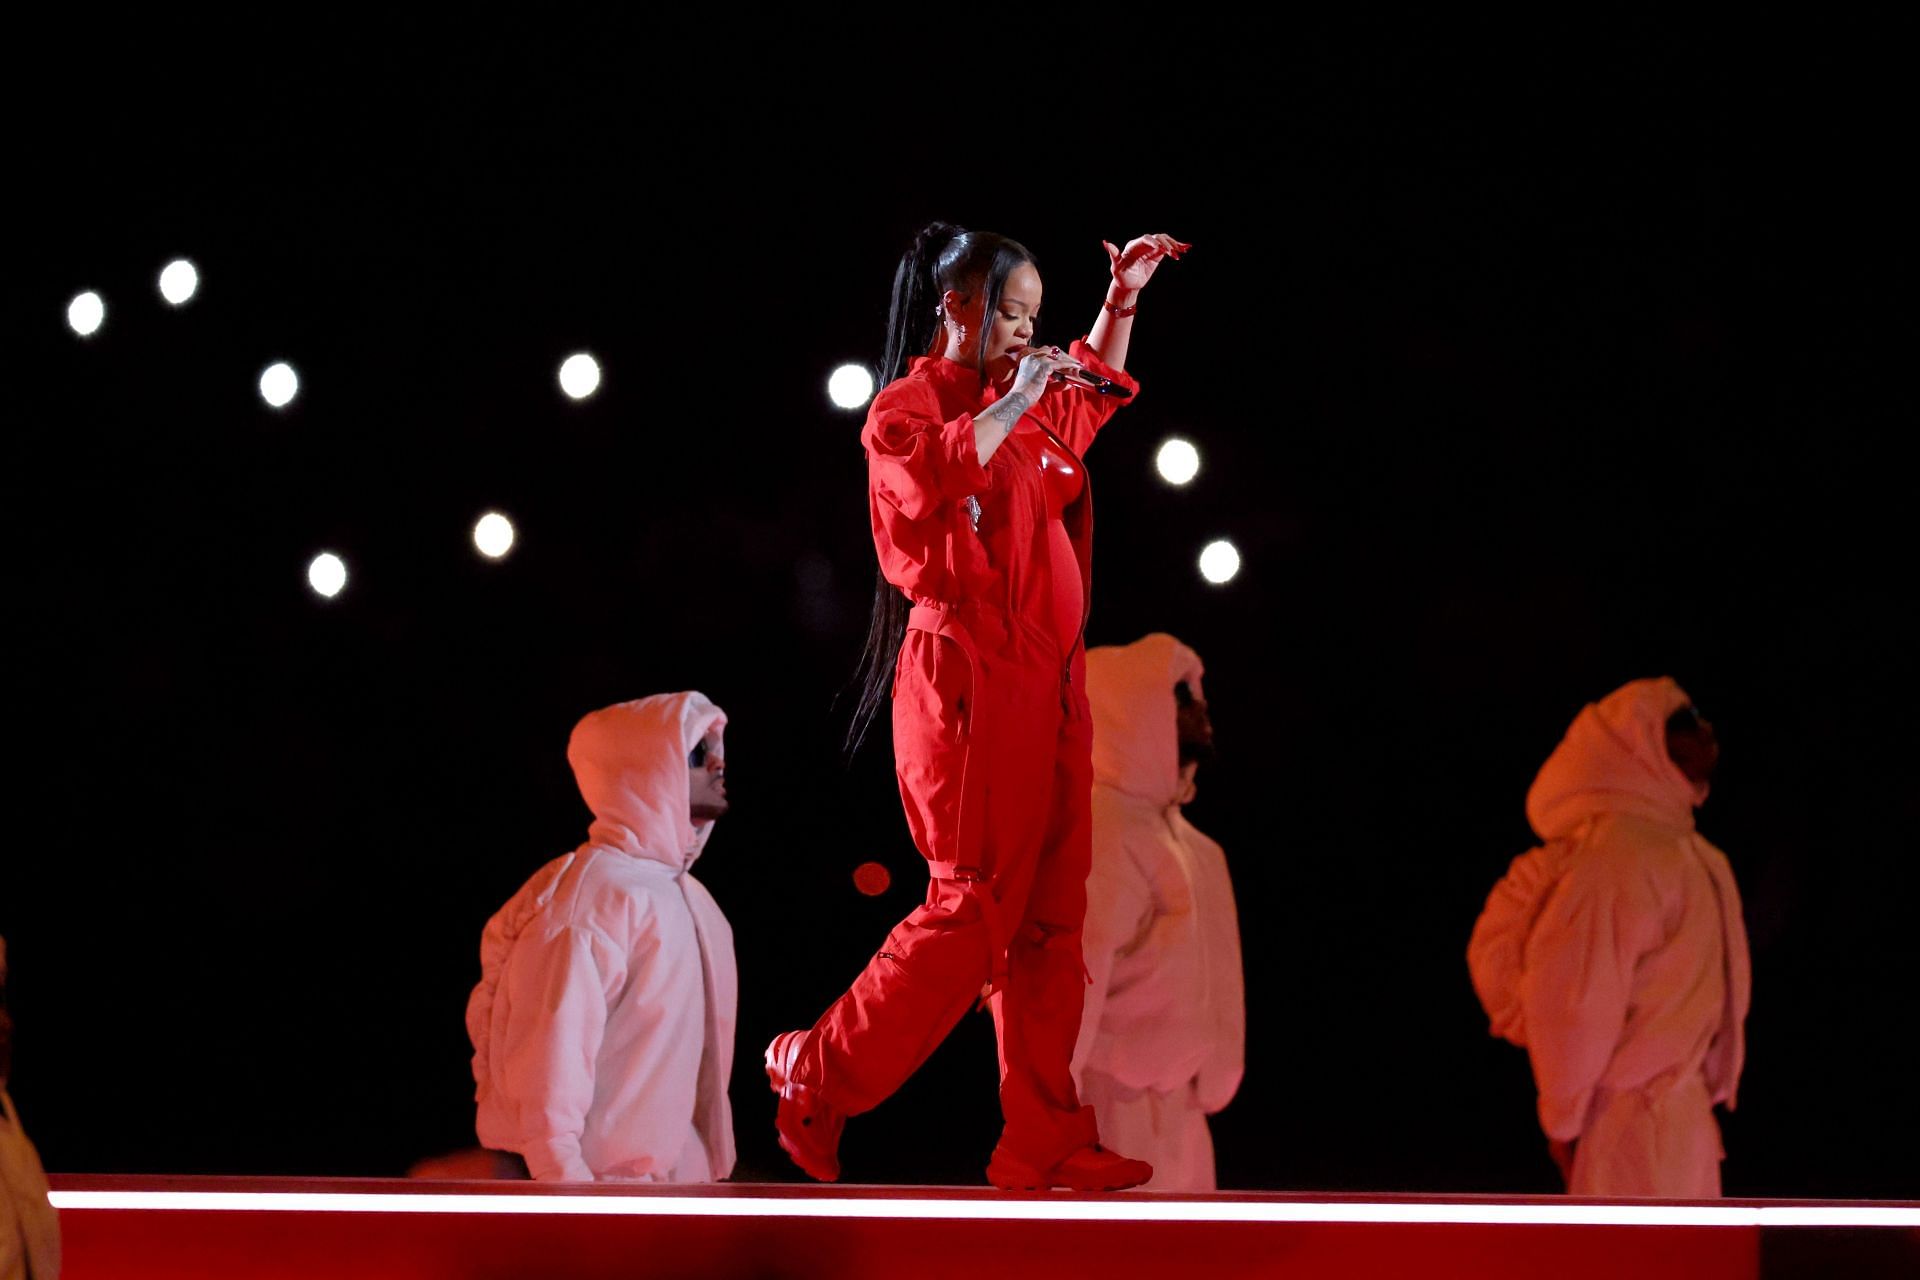 Rihanna performs onstage during the Apple Music Super Bowl LVII Halftime Show at State Farm Stadium